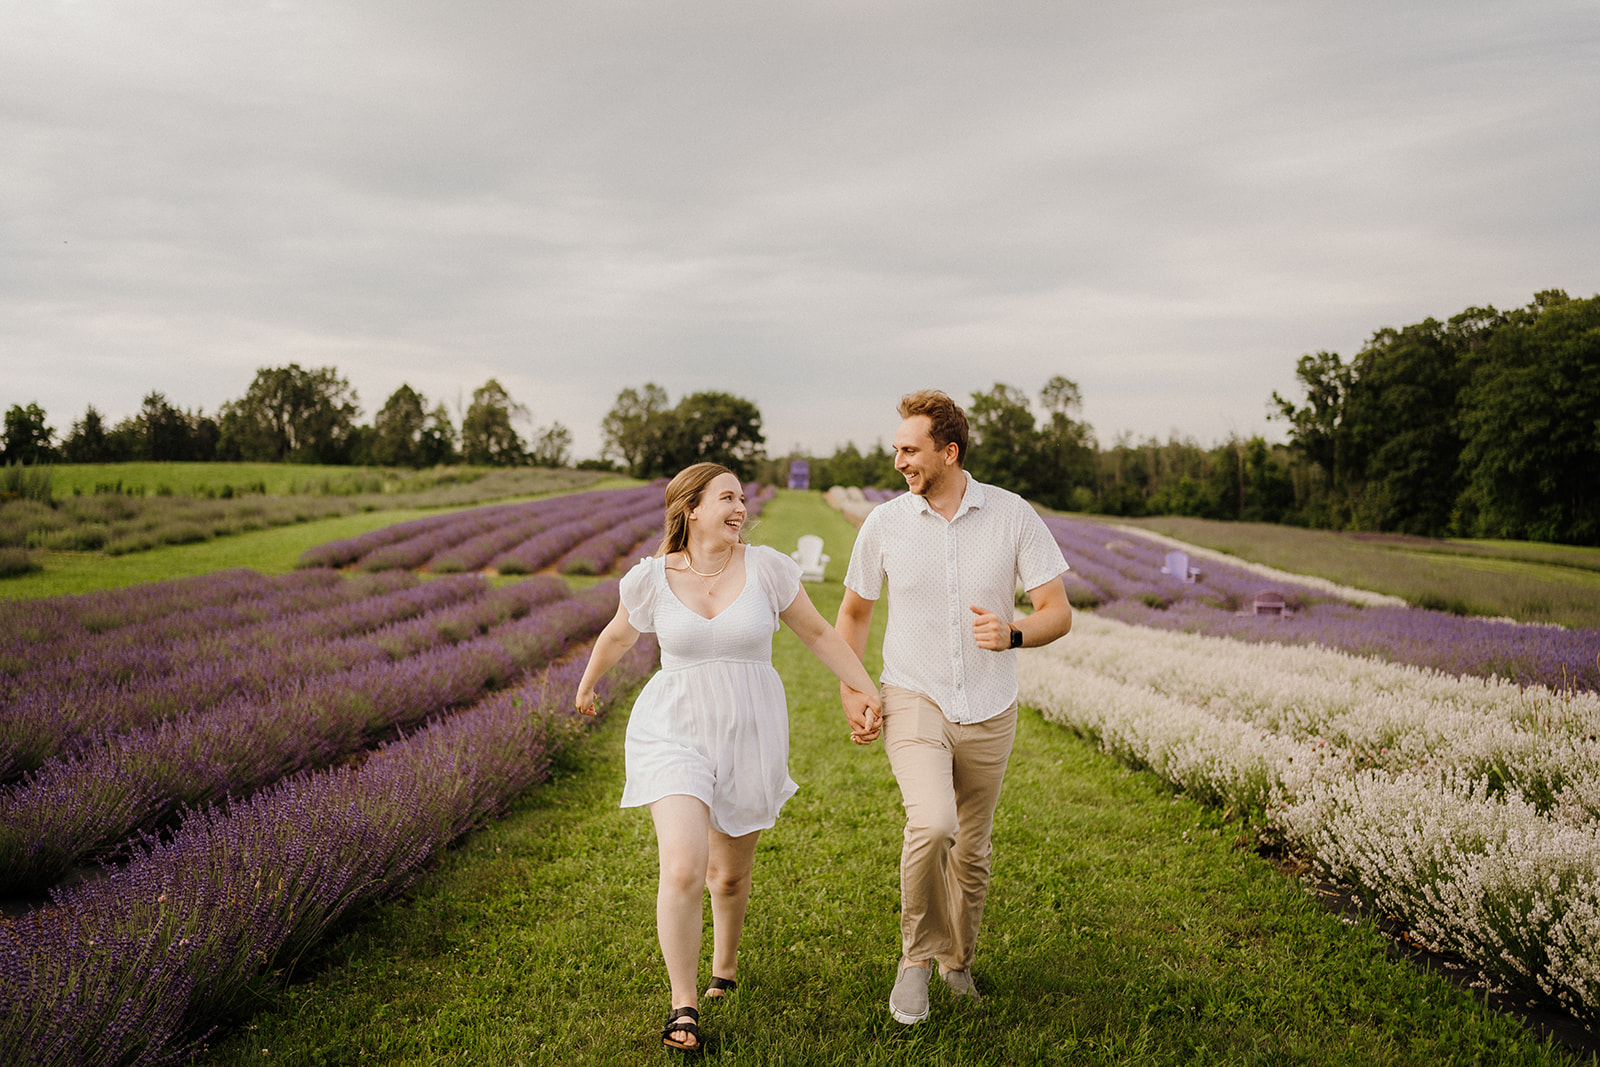 Man looking at woman holding hands while walking next to a field of lavender.